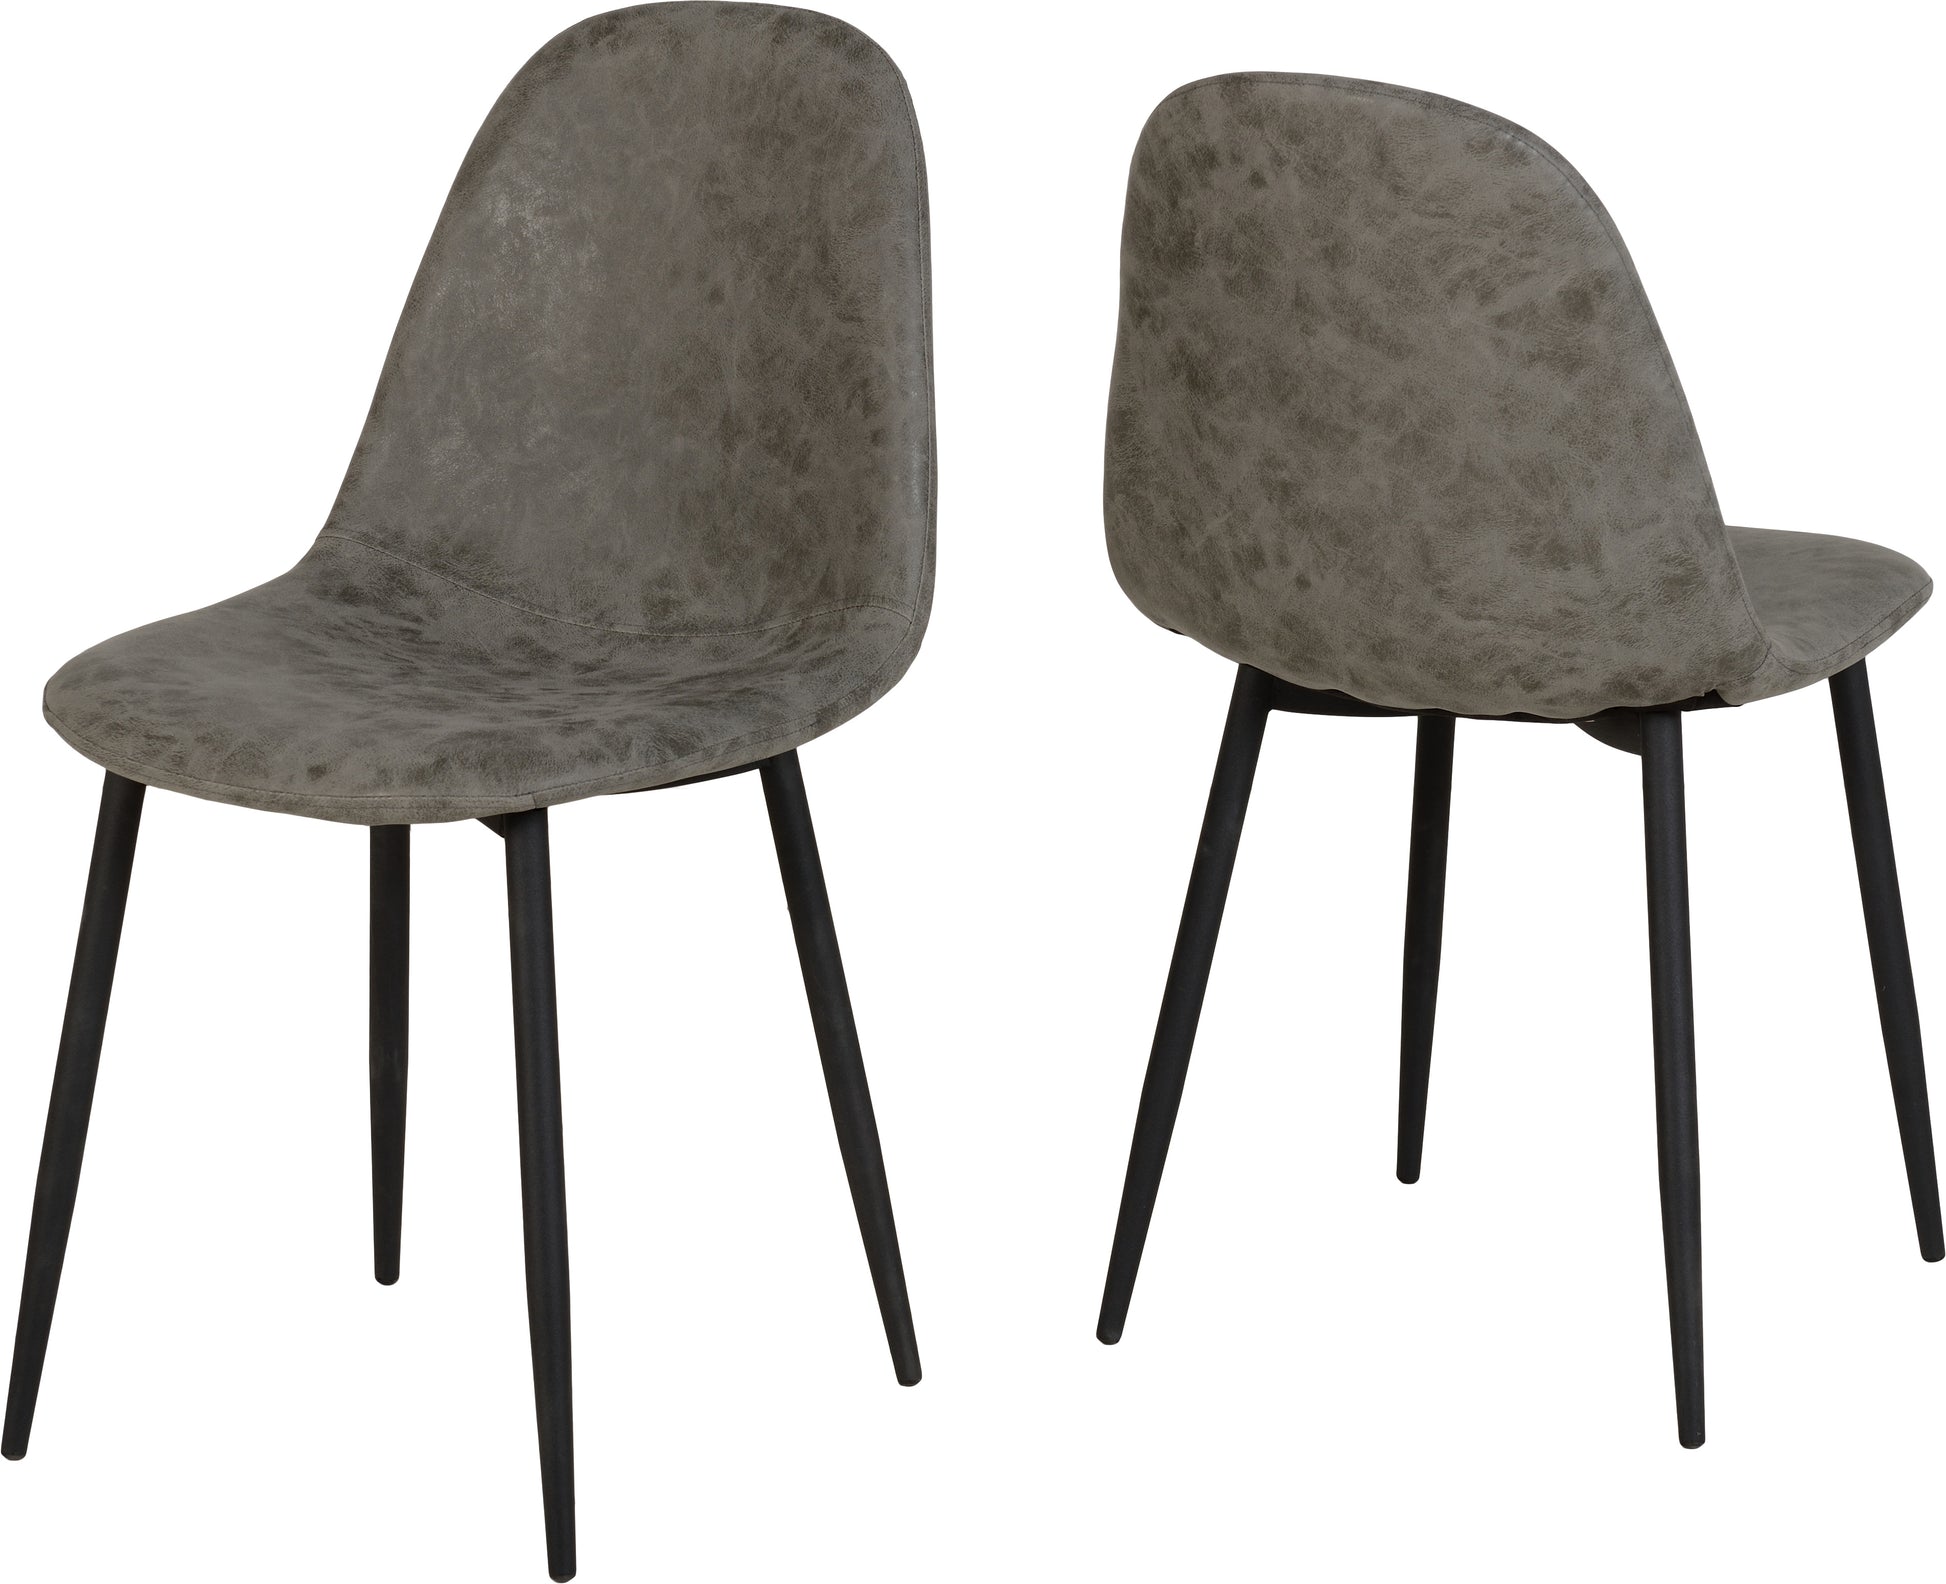 ATHENS-DINING-CHAIR-GREYAthens Rectangular Dining Set Concrete Effect/Black/Grey Faux Leather- The Right Buy Store